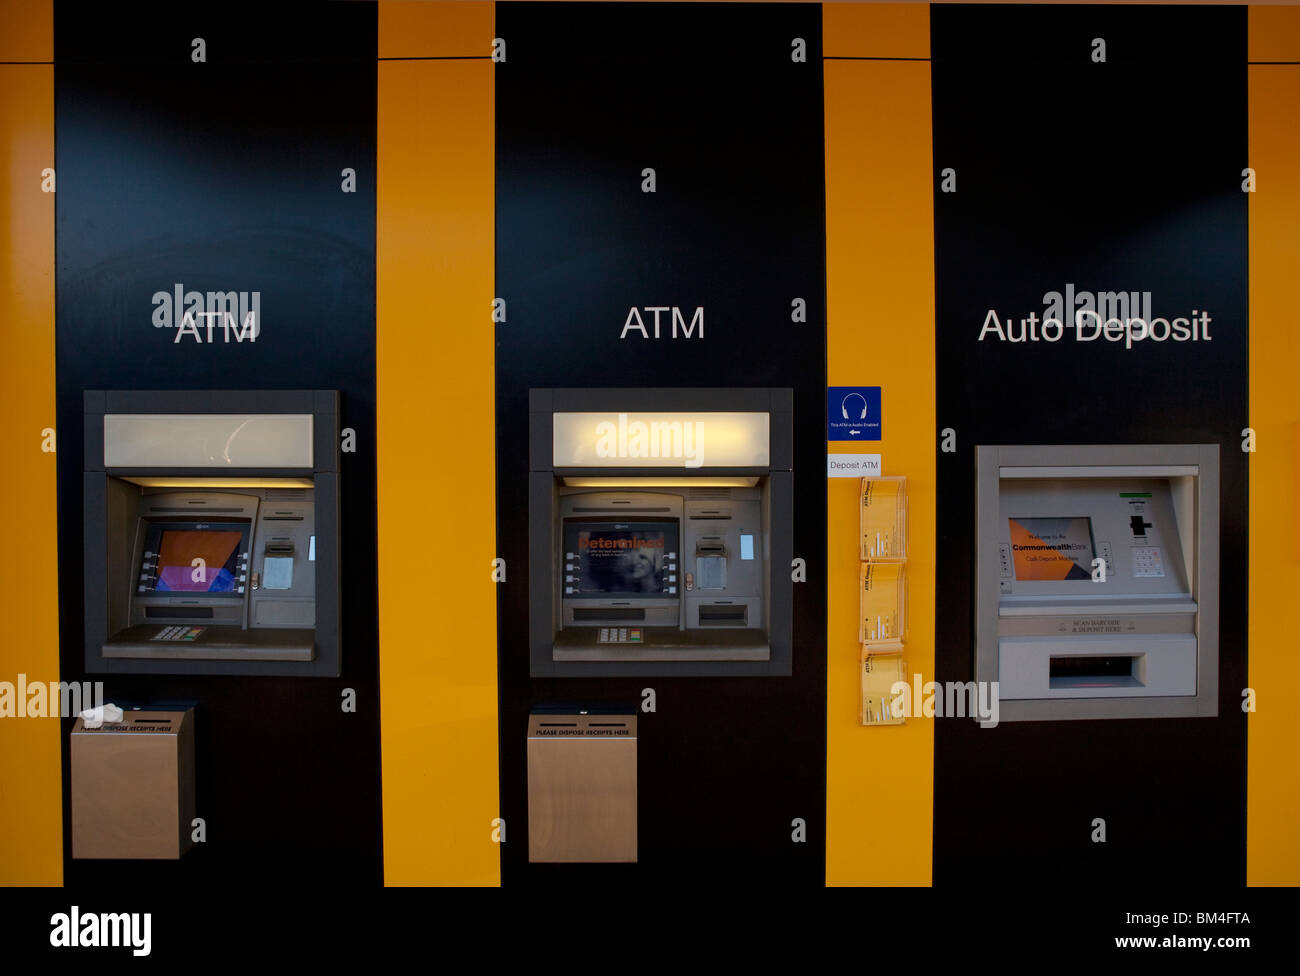 Commonwealth Bank ATM and Auto Deposit point Stock Photo